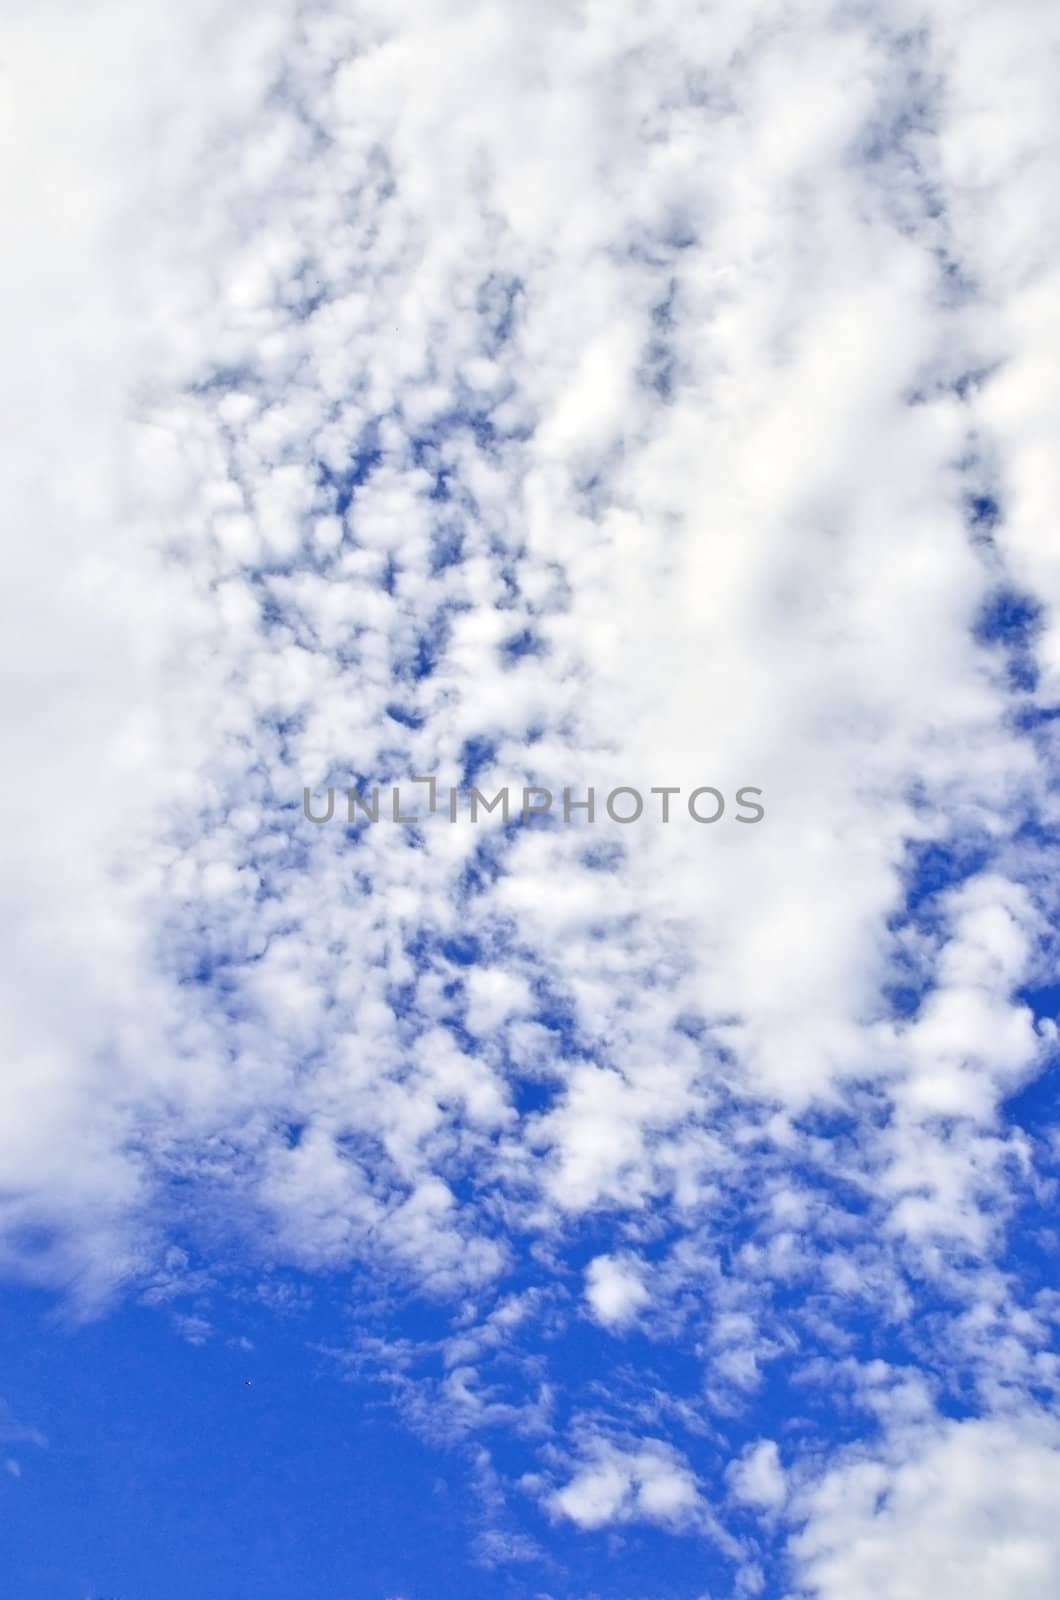 View of the summer sky with fragmented by wind clouds